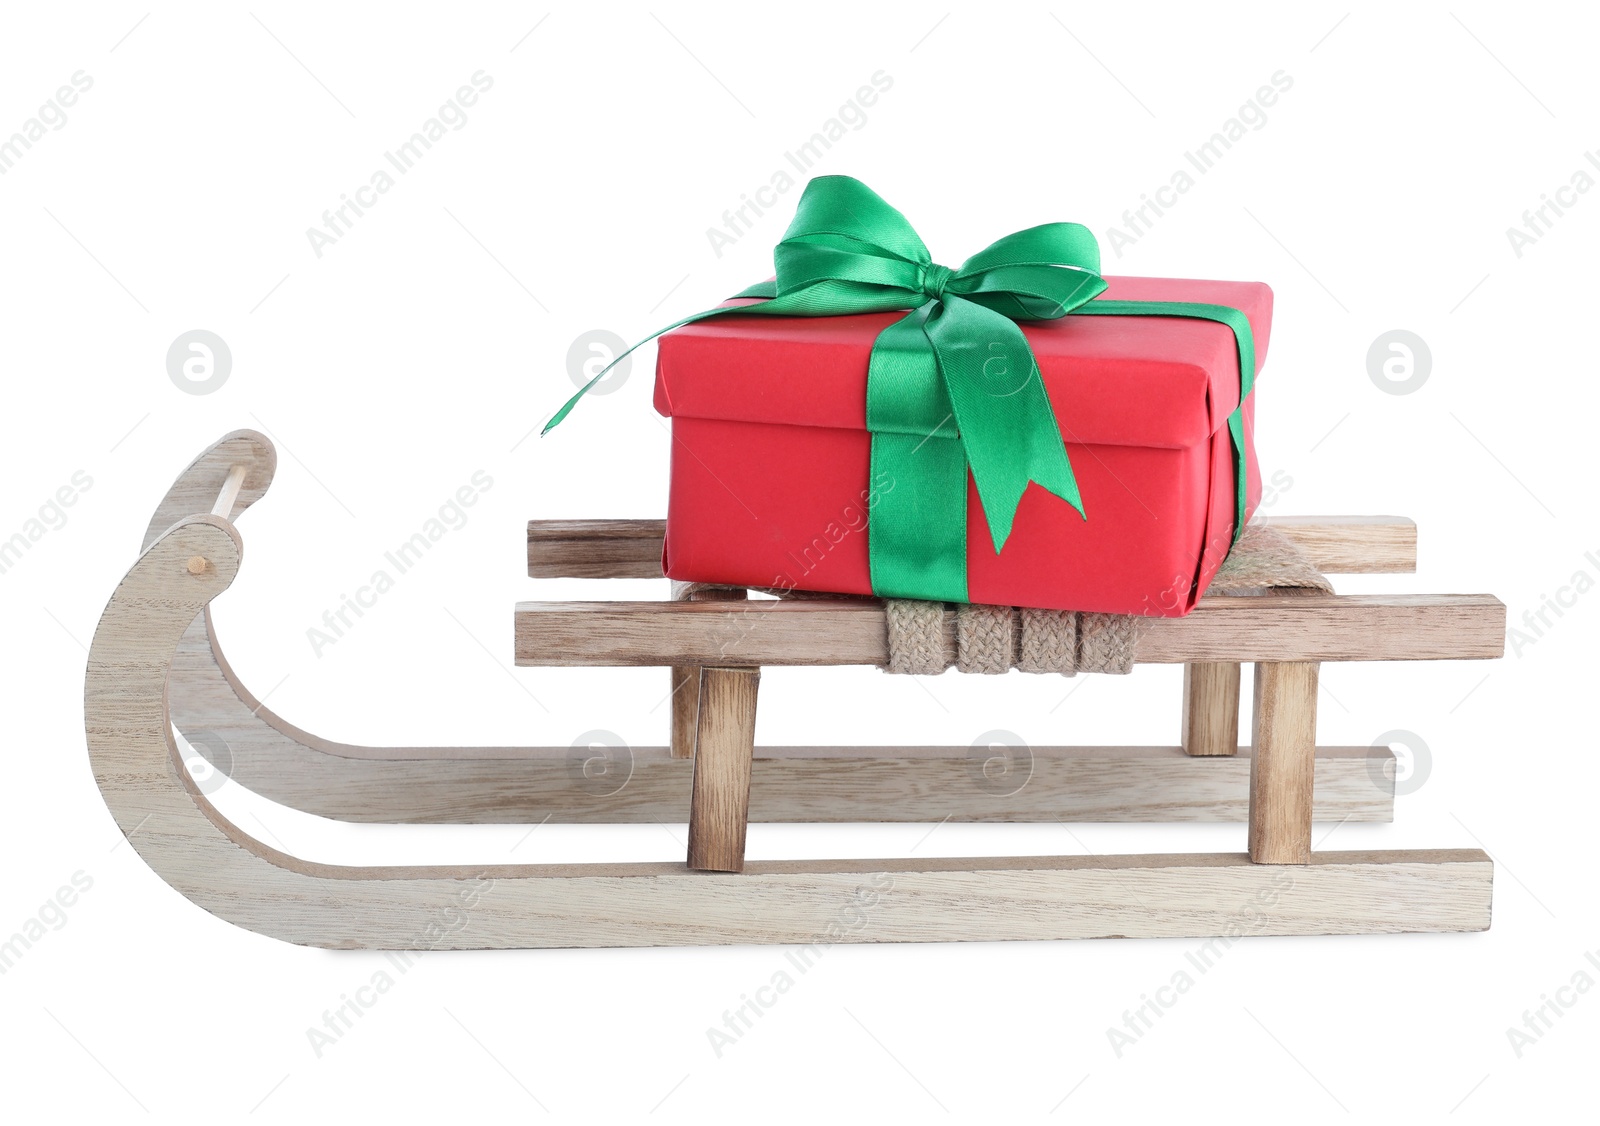 Photo of Wooden sleigh with gift box isolated on white. Christmas holiday decor